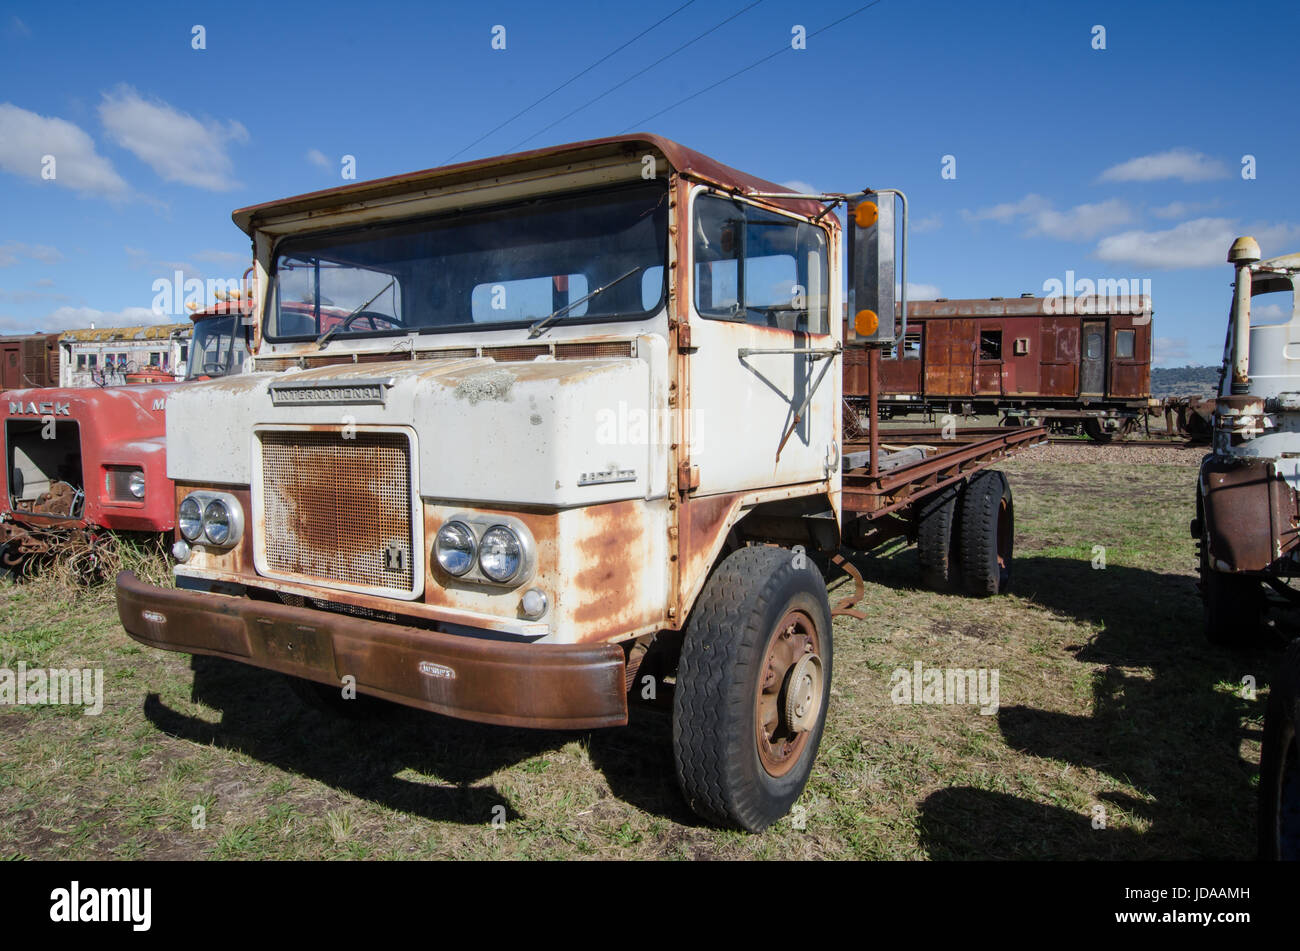 An Old International Harvester AACO 170 Series Truck in a Vehicle Graveyard. Stock Photo